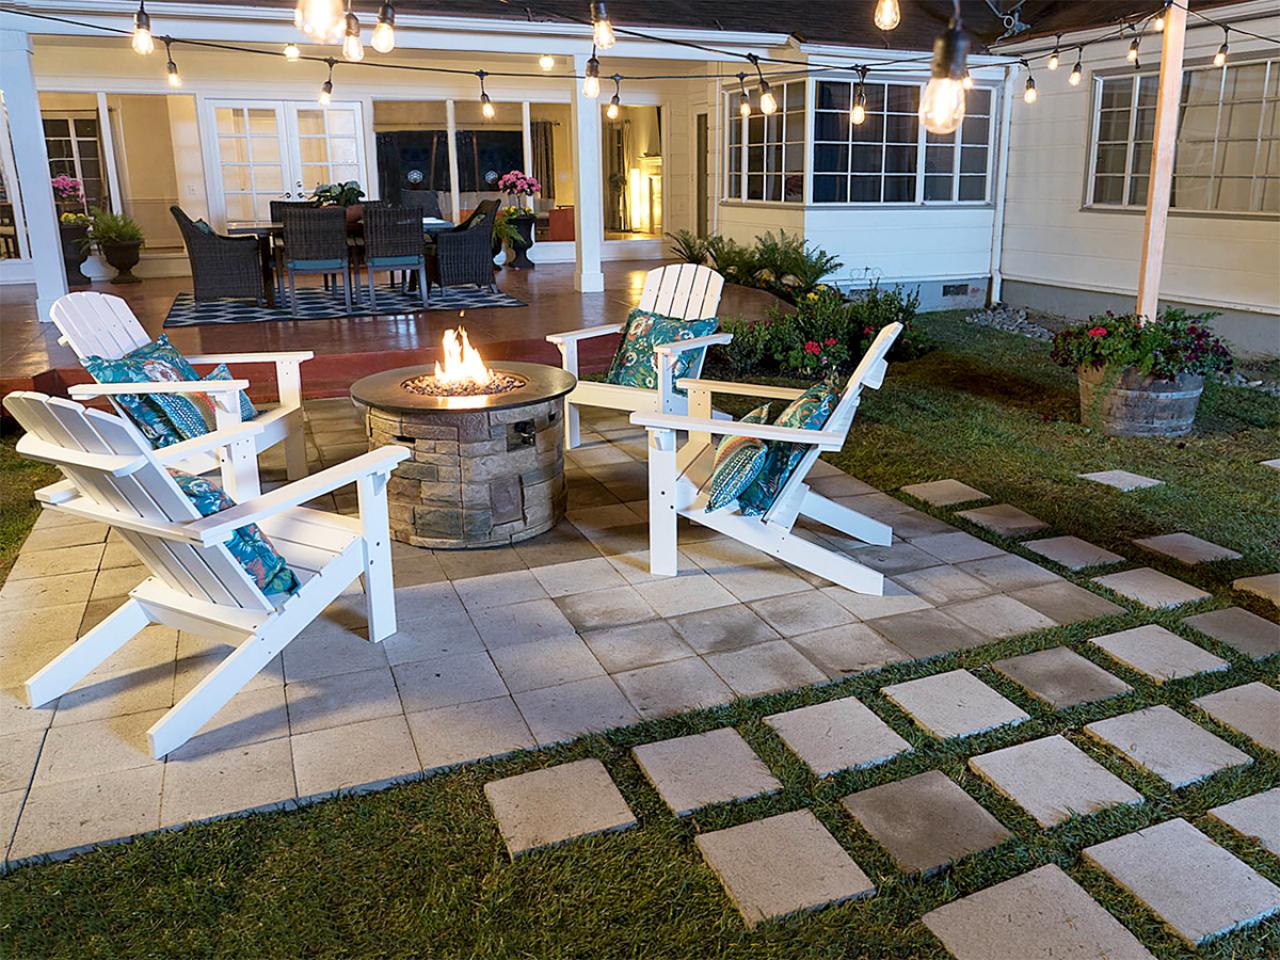 How To Lay A Paver Patio For Firepit, How To Make A Patio Fire Pit